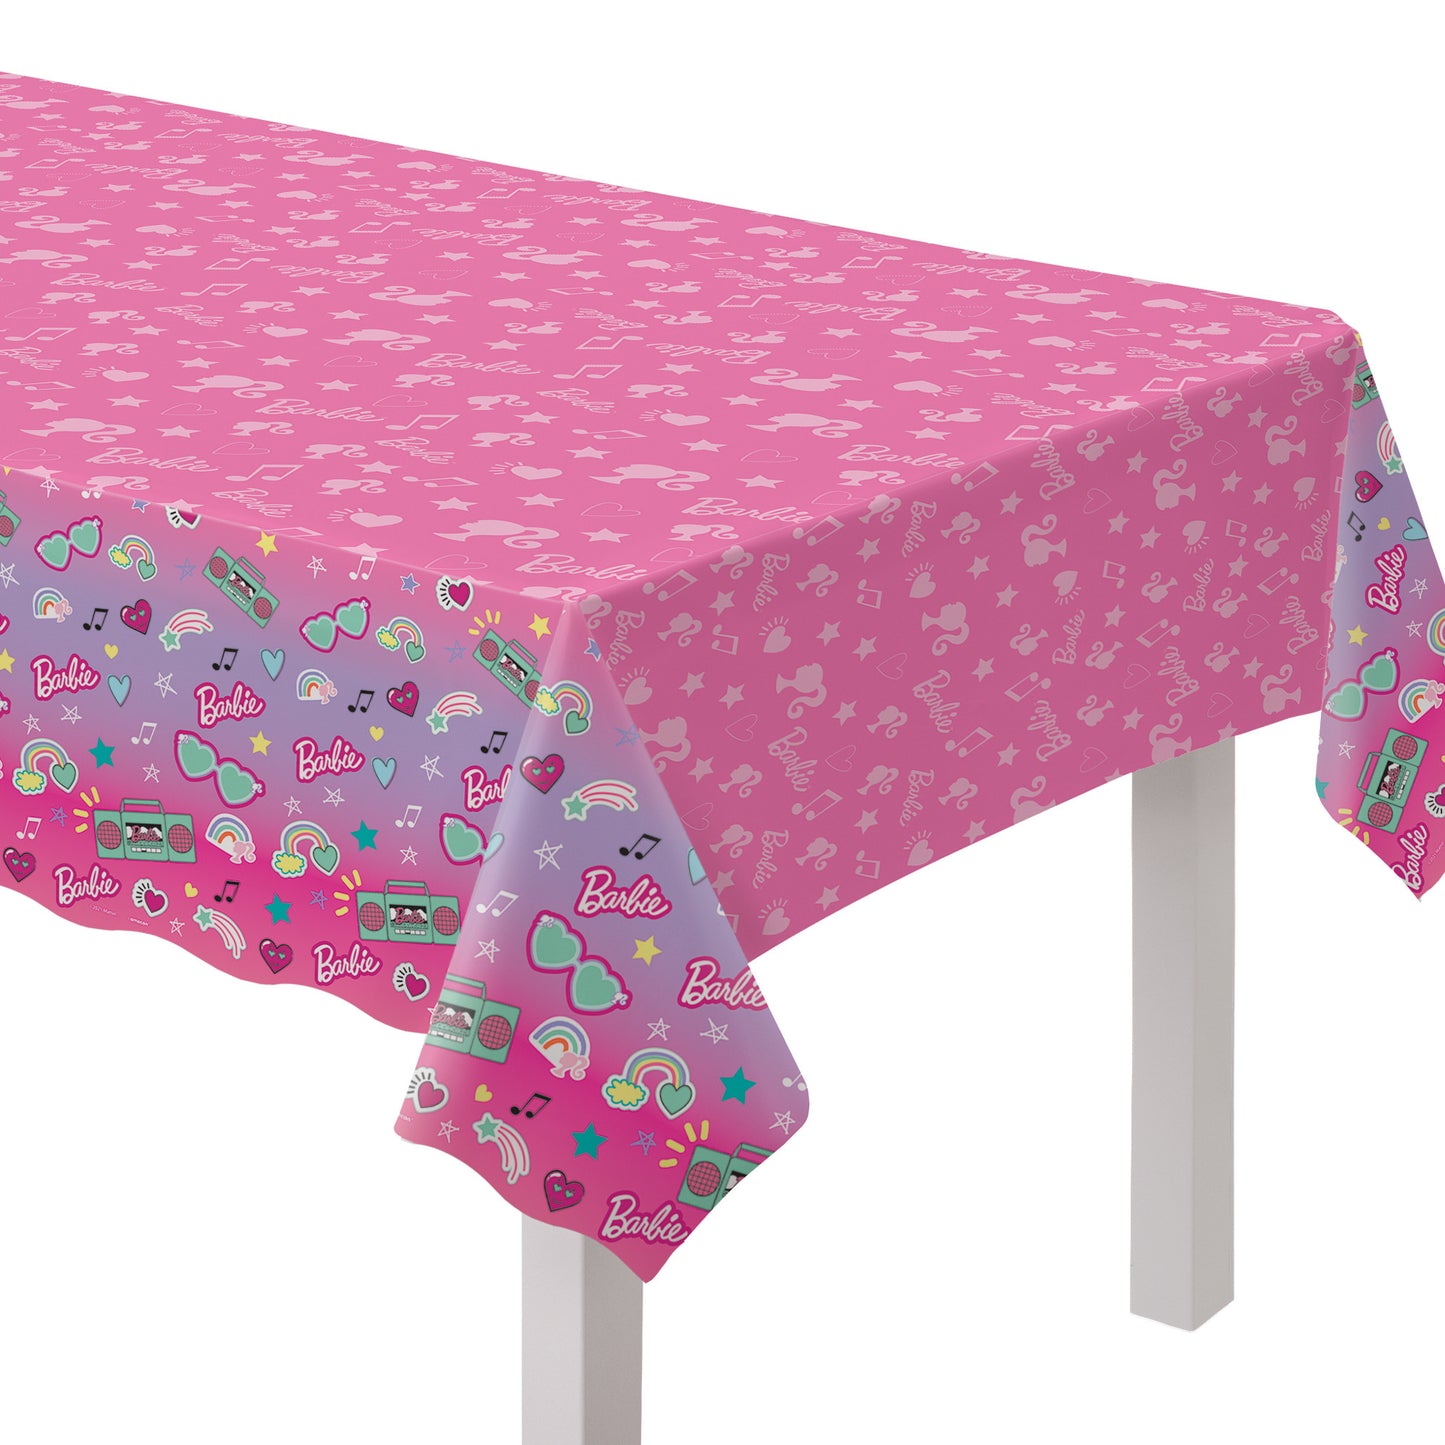 Barbie Dream Together Rectangular Plastic Table Cover, 54" x 96"